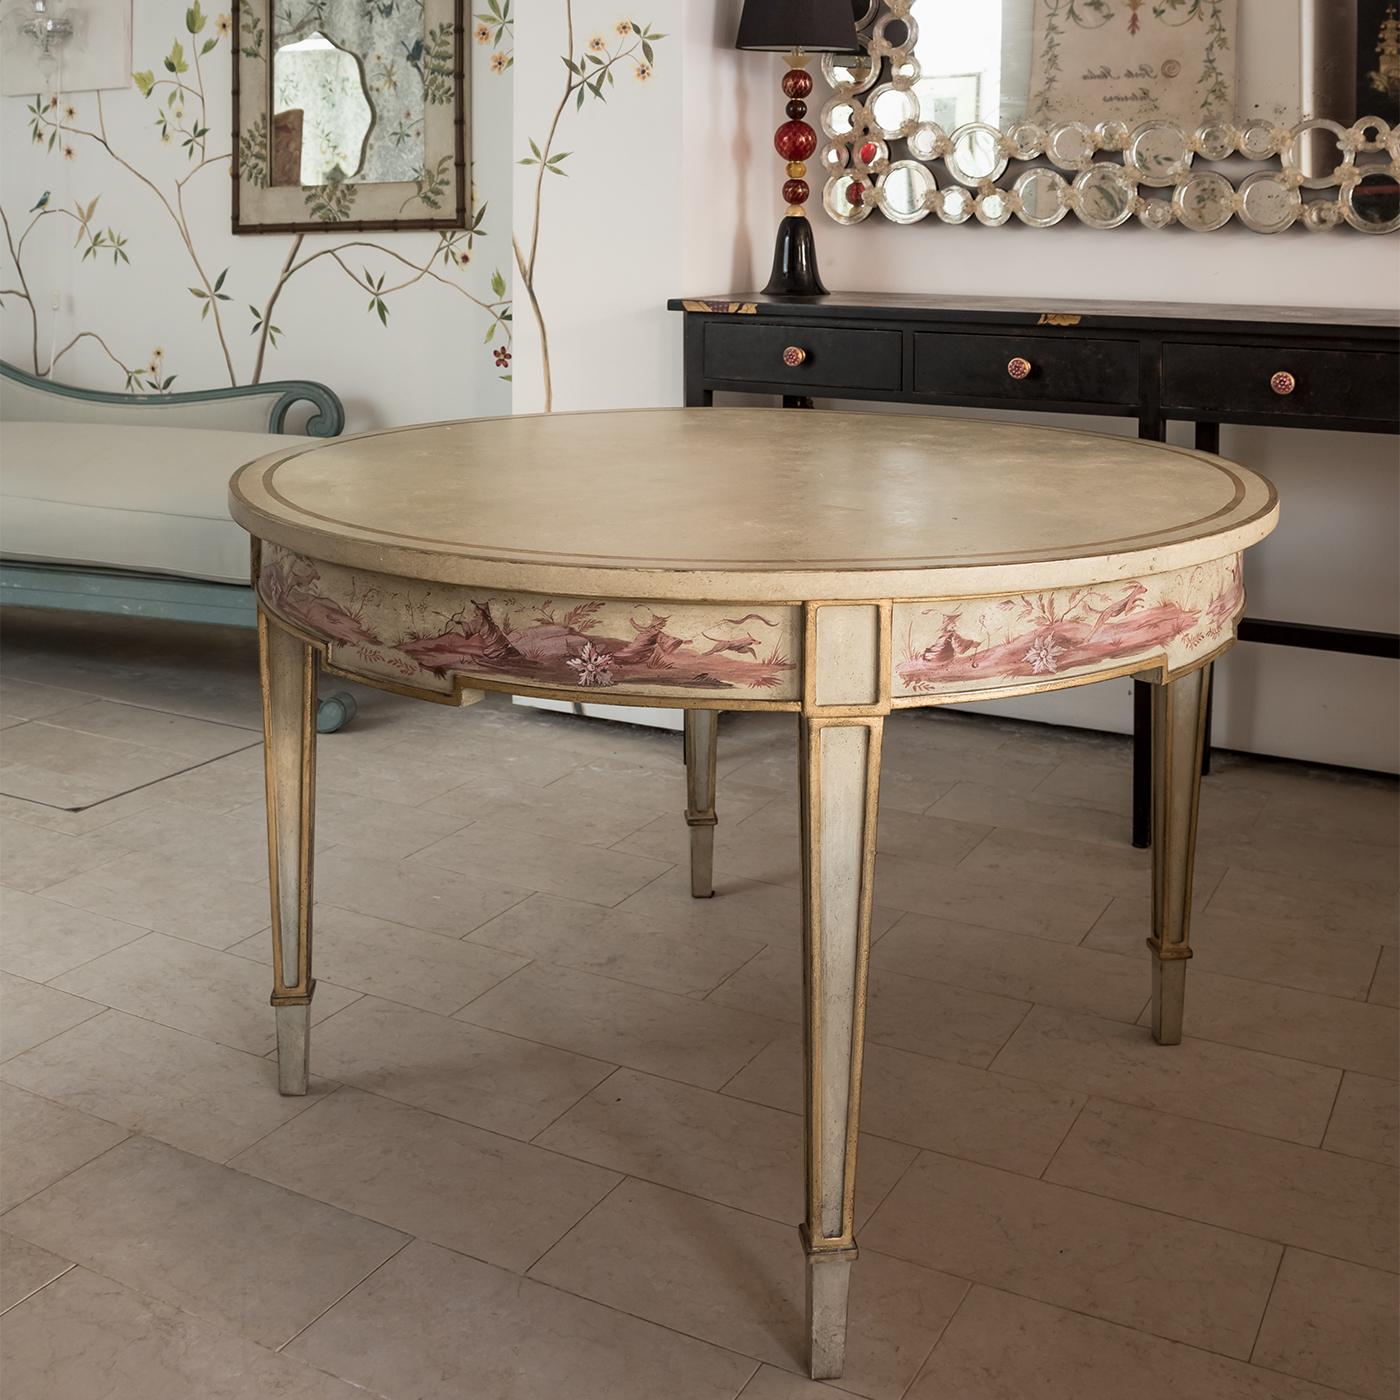 Apple Green Manin Dining Table with Purple Chinoiserie Decors In New Condition For Sale In Milan, IT